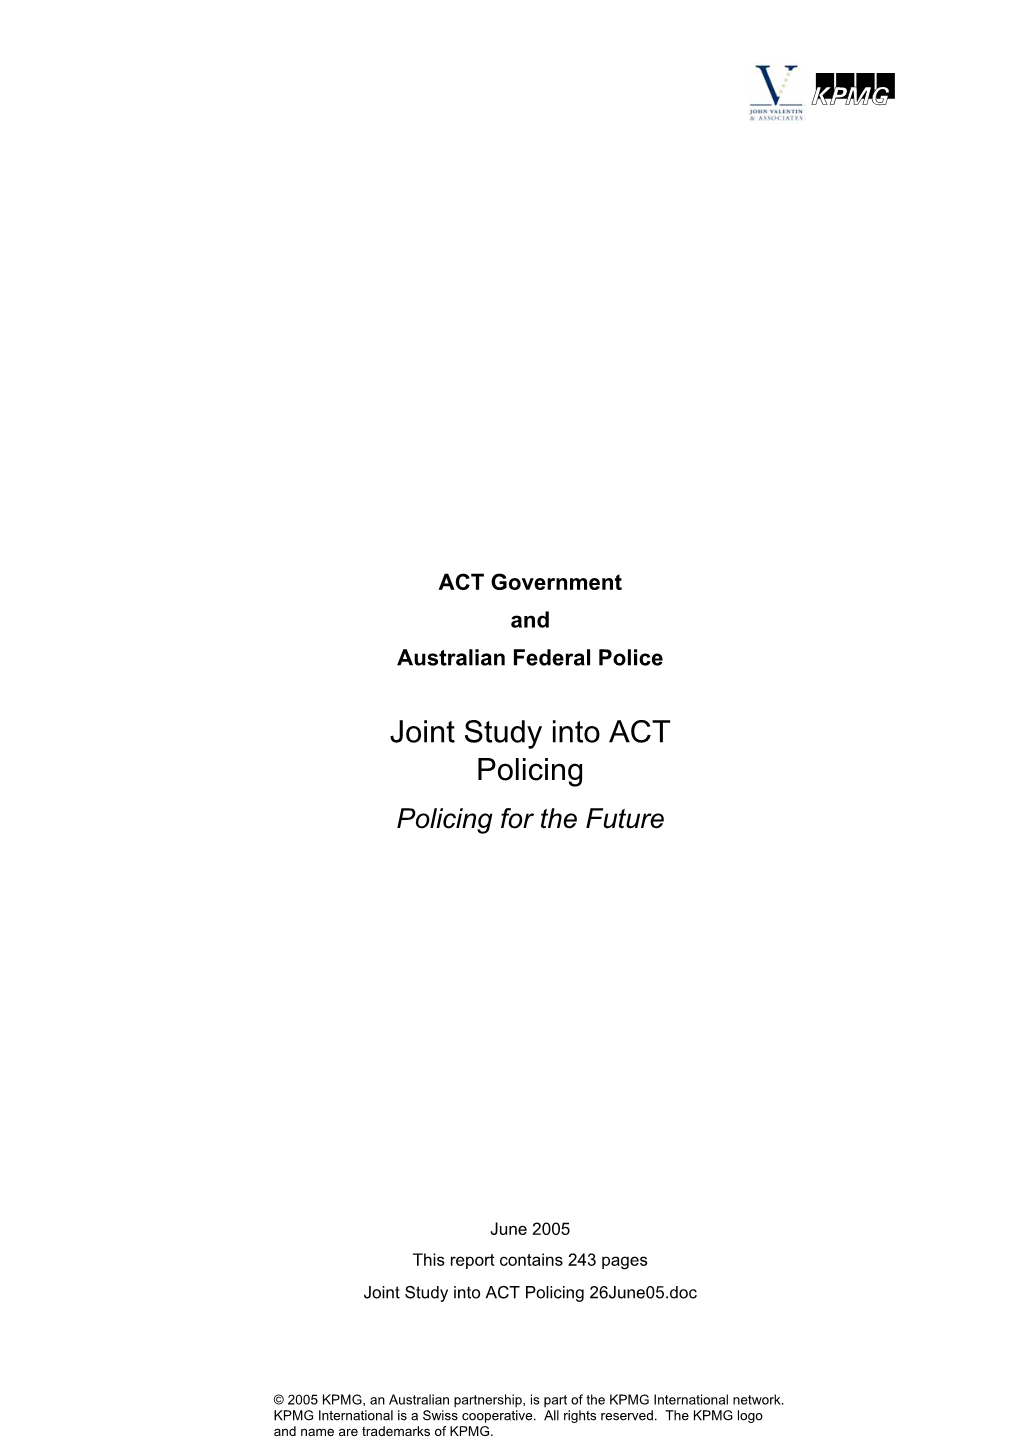 Joint Study Into ACT Policing June 05